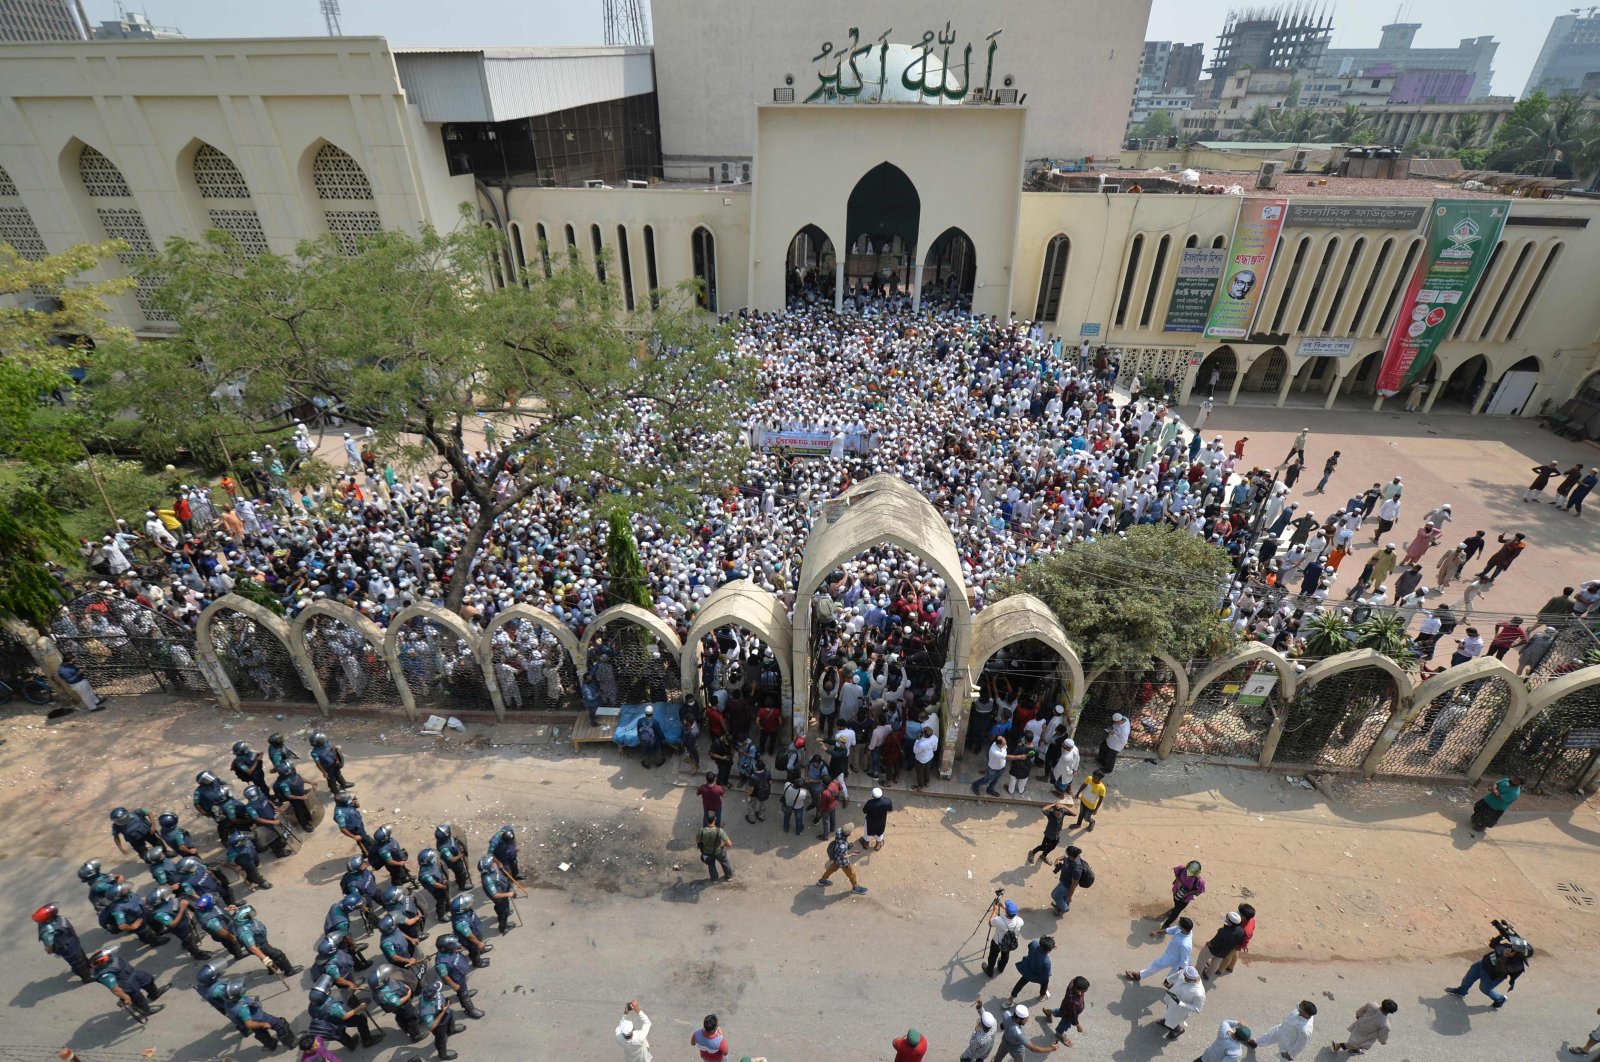 Police personnel stand outside the National Mosque as activists of the Hefazat-e Islam protest outside, Dhaka, Bangladesh, April 2, 2021. (AFP Photo)